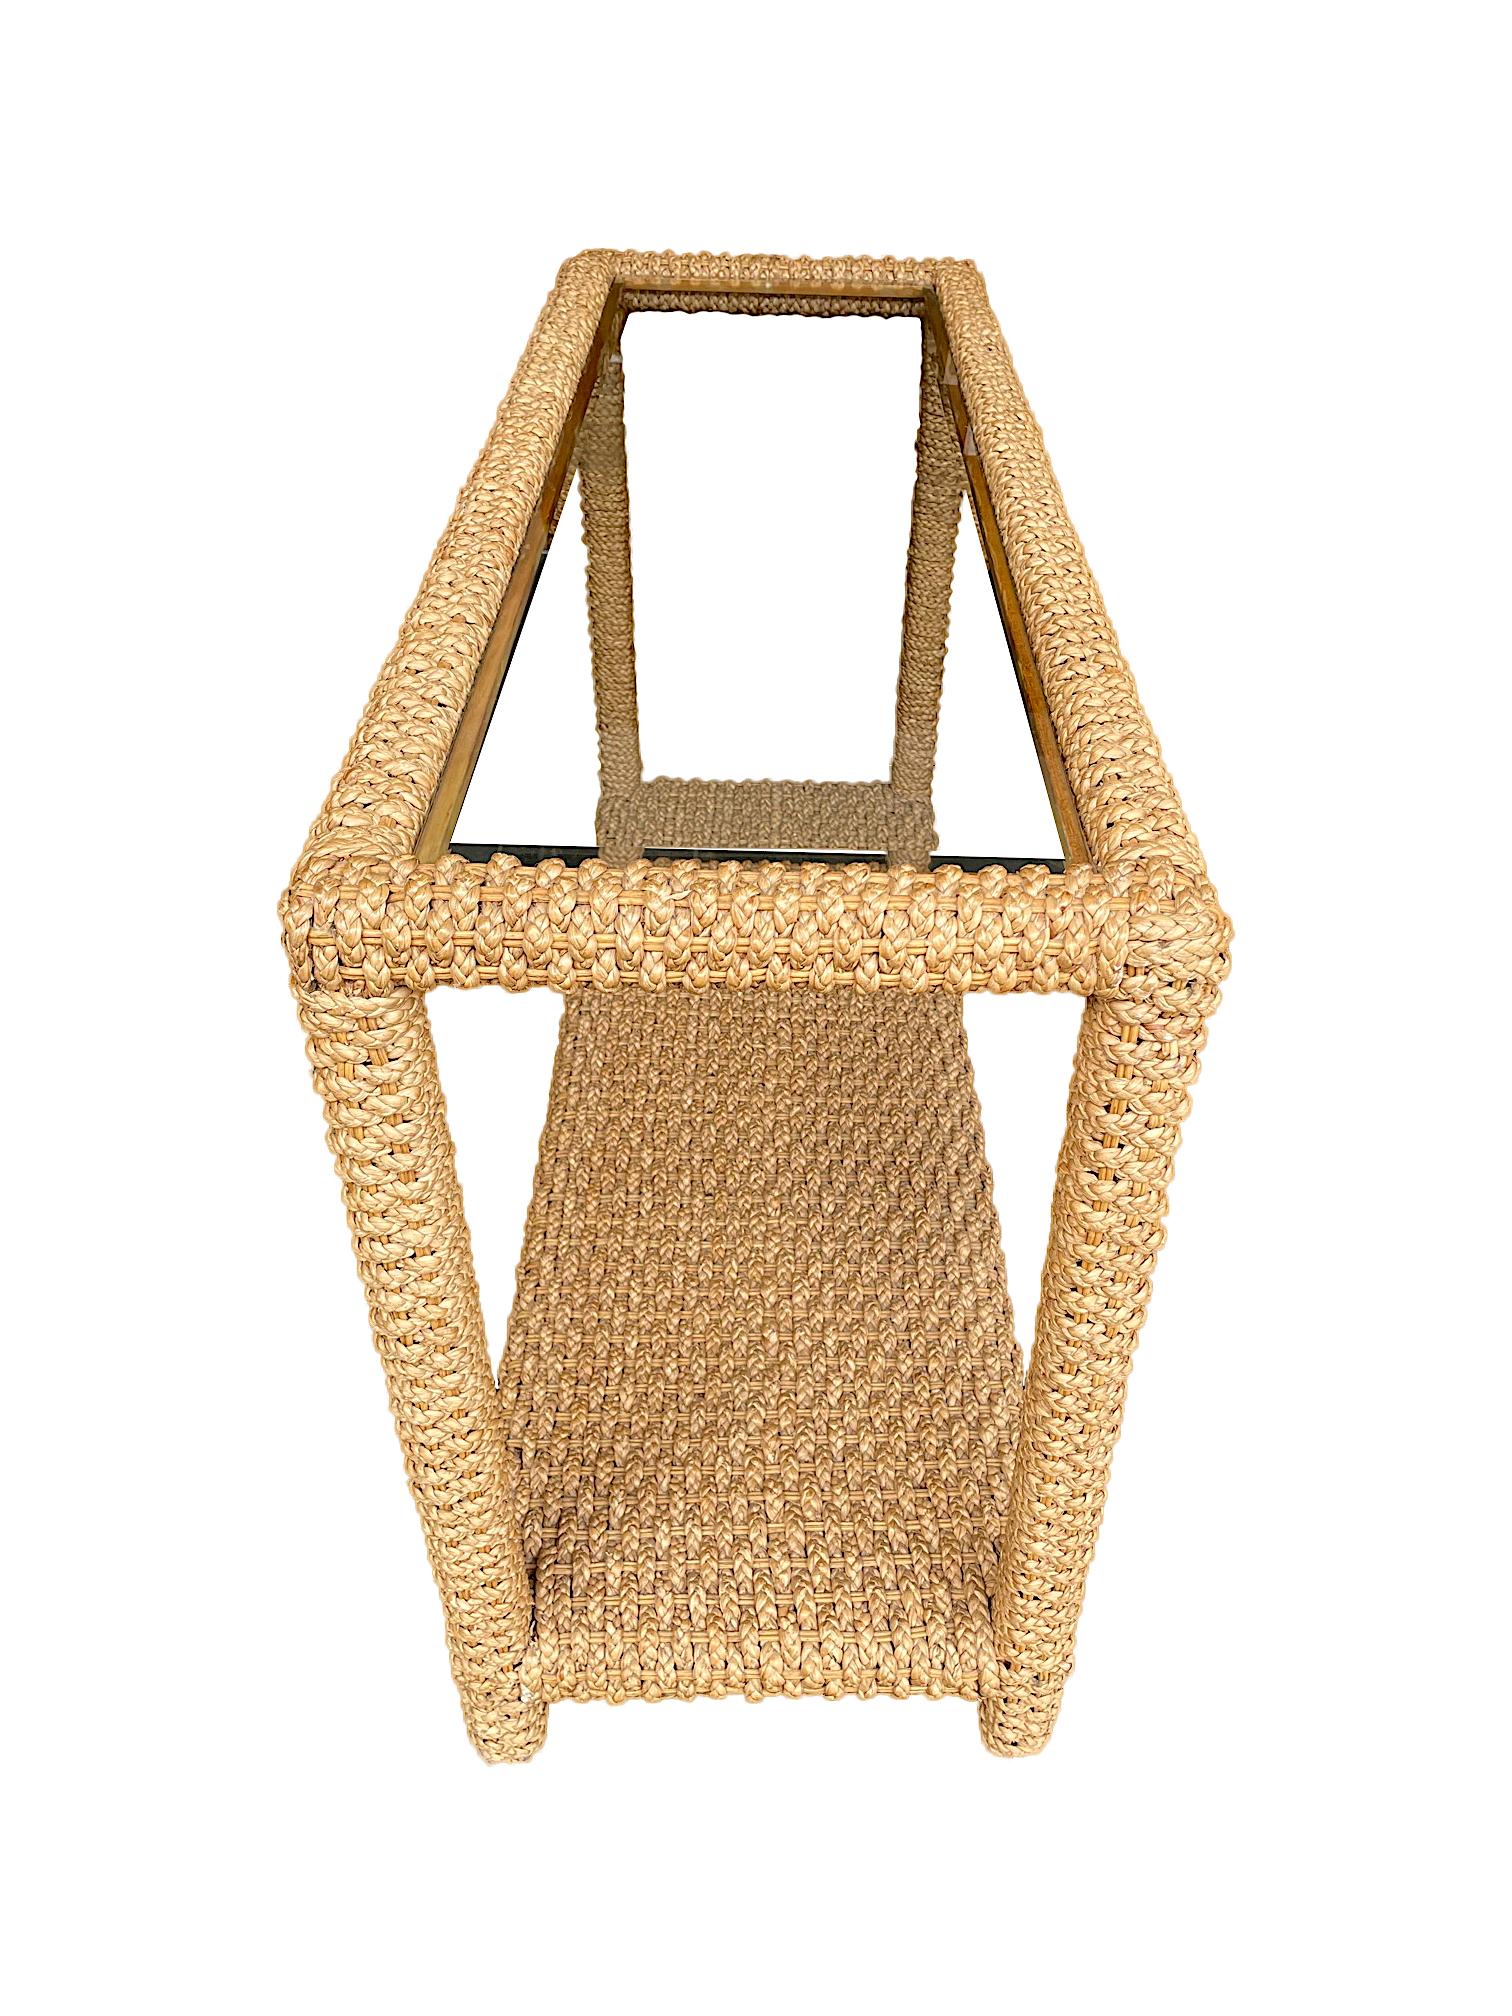 Stunning 1950s Rope Console by Adrian Audoux and Frida Minet with Glass Shelf 1